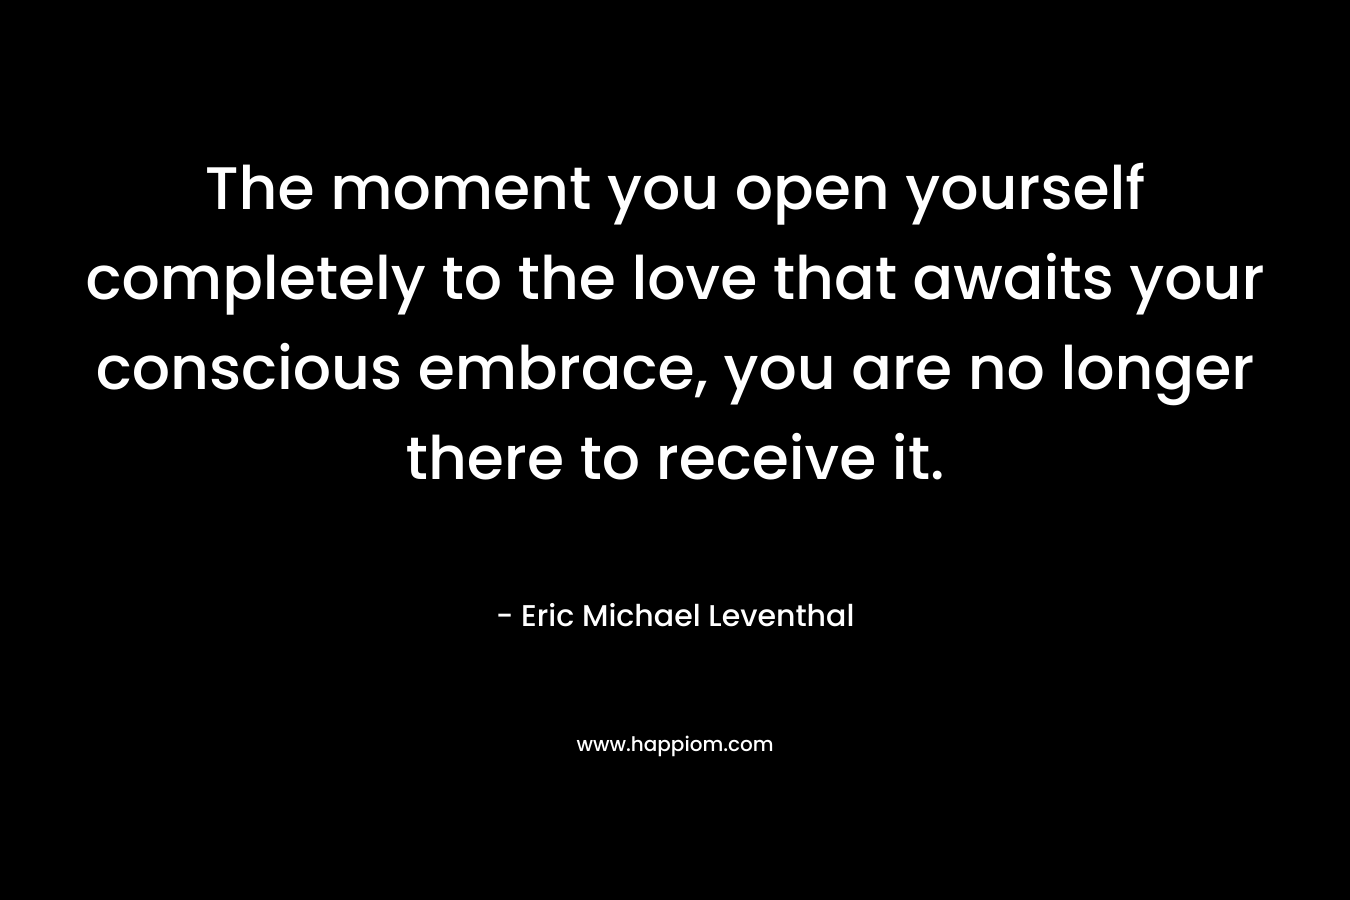 The moment you open yourself completely to the love that awaits your conscious embrace, you are no longer there to receive it.